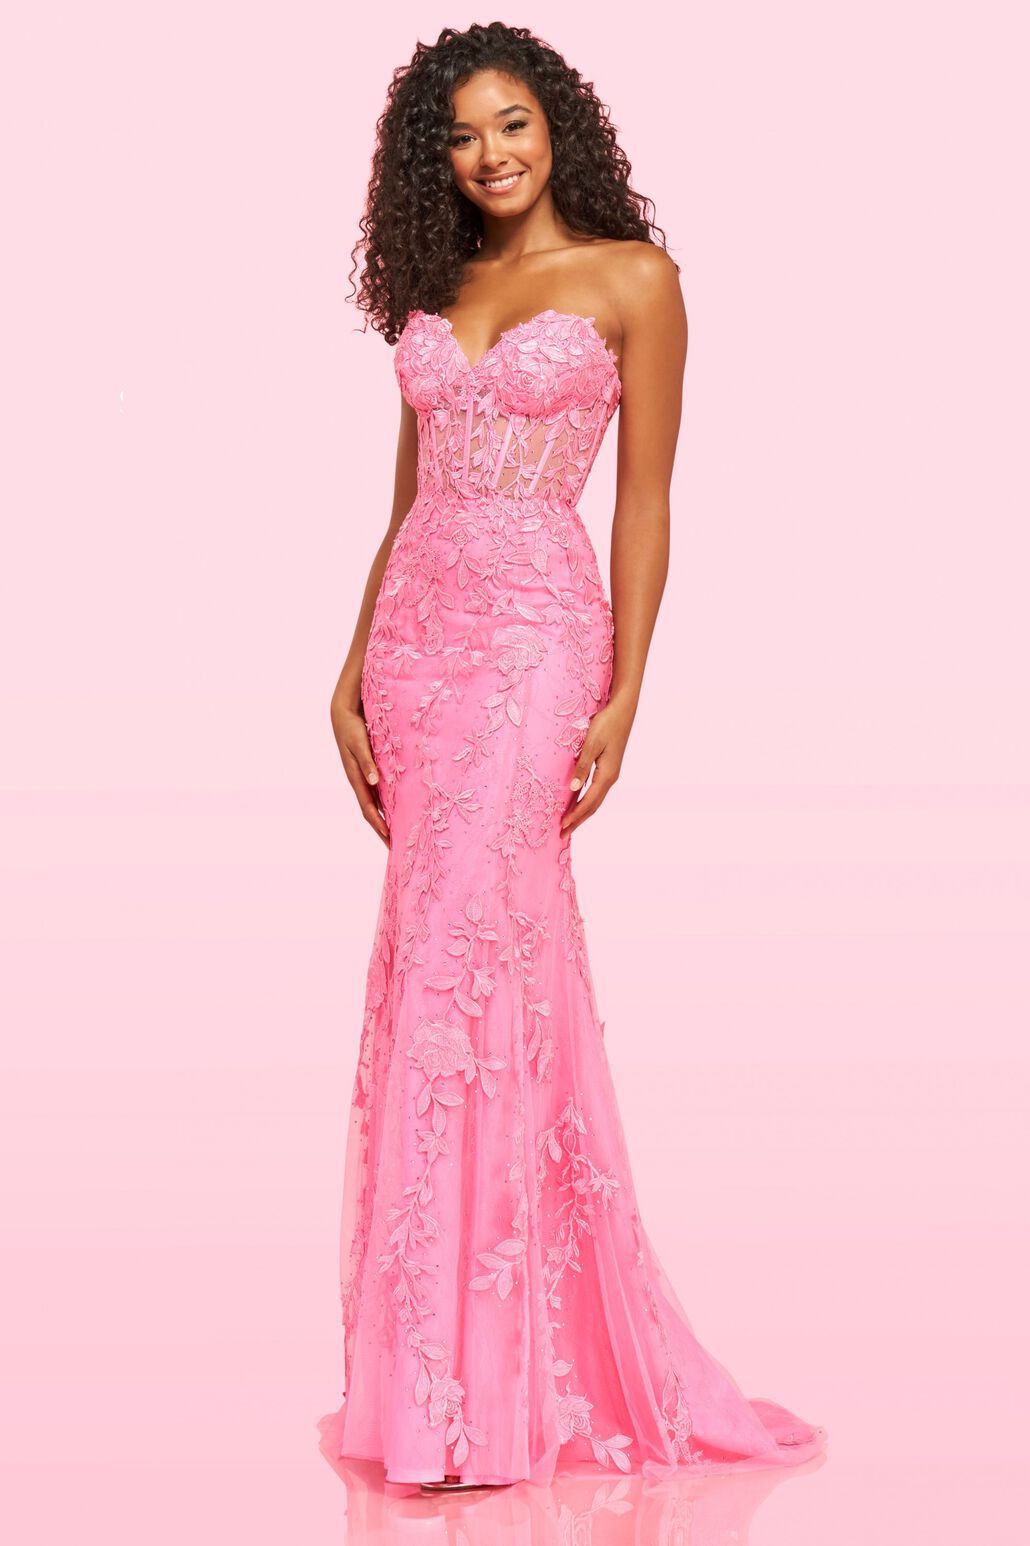 Sherri Hill Strapless Lace Corset Gown 55419 – Terry Costa